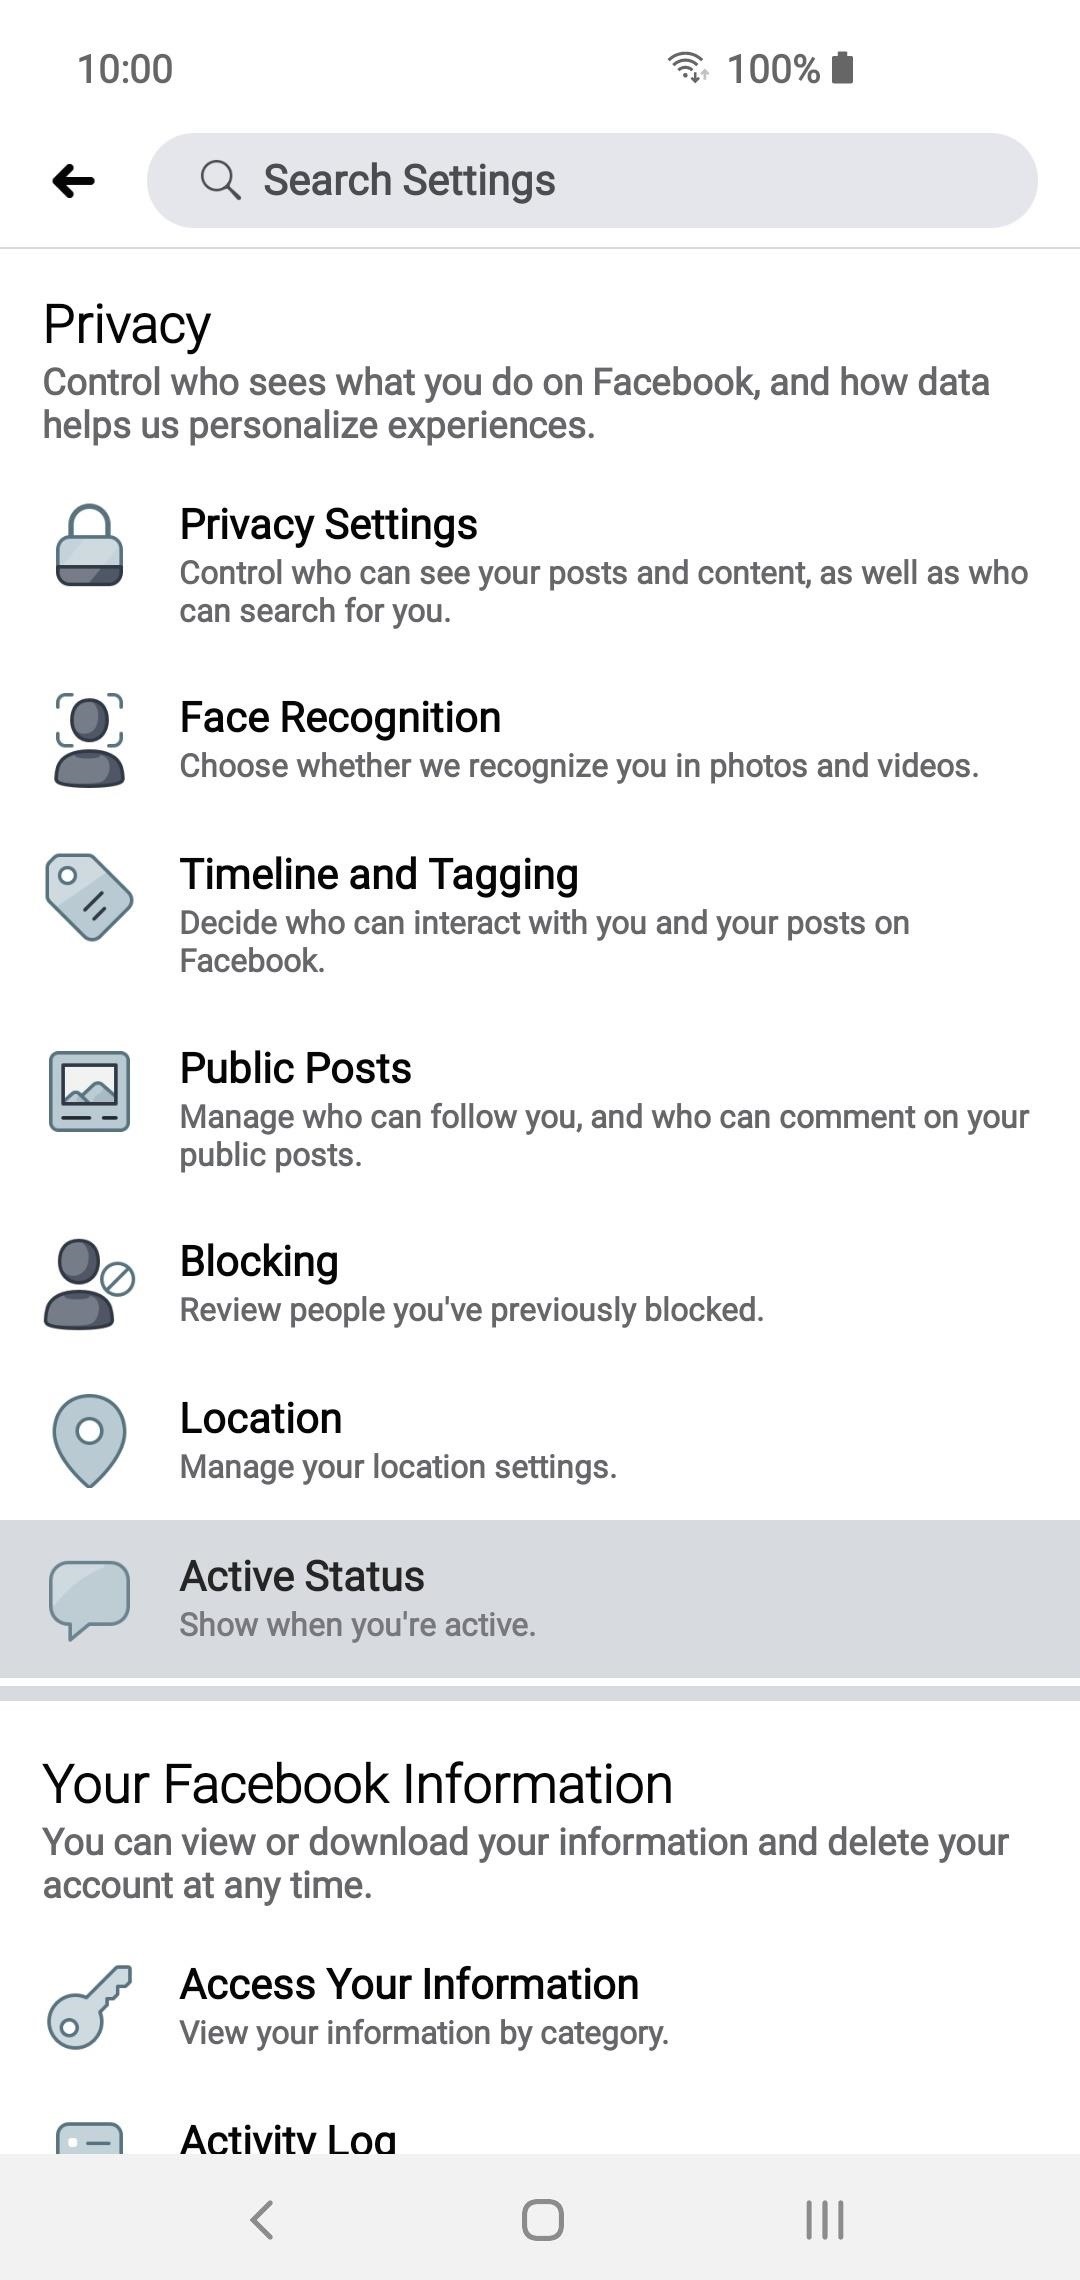 How to Completely Disable Your Active Status on Facebook & Messenger